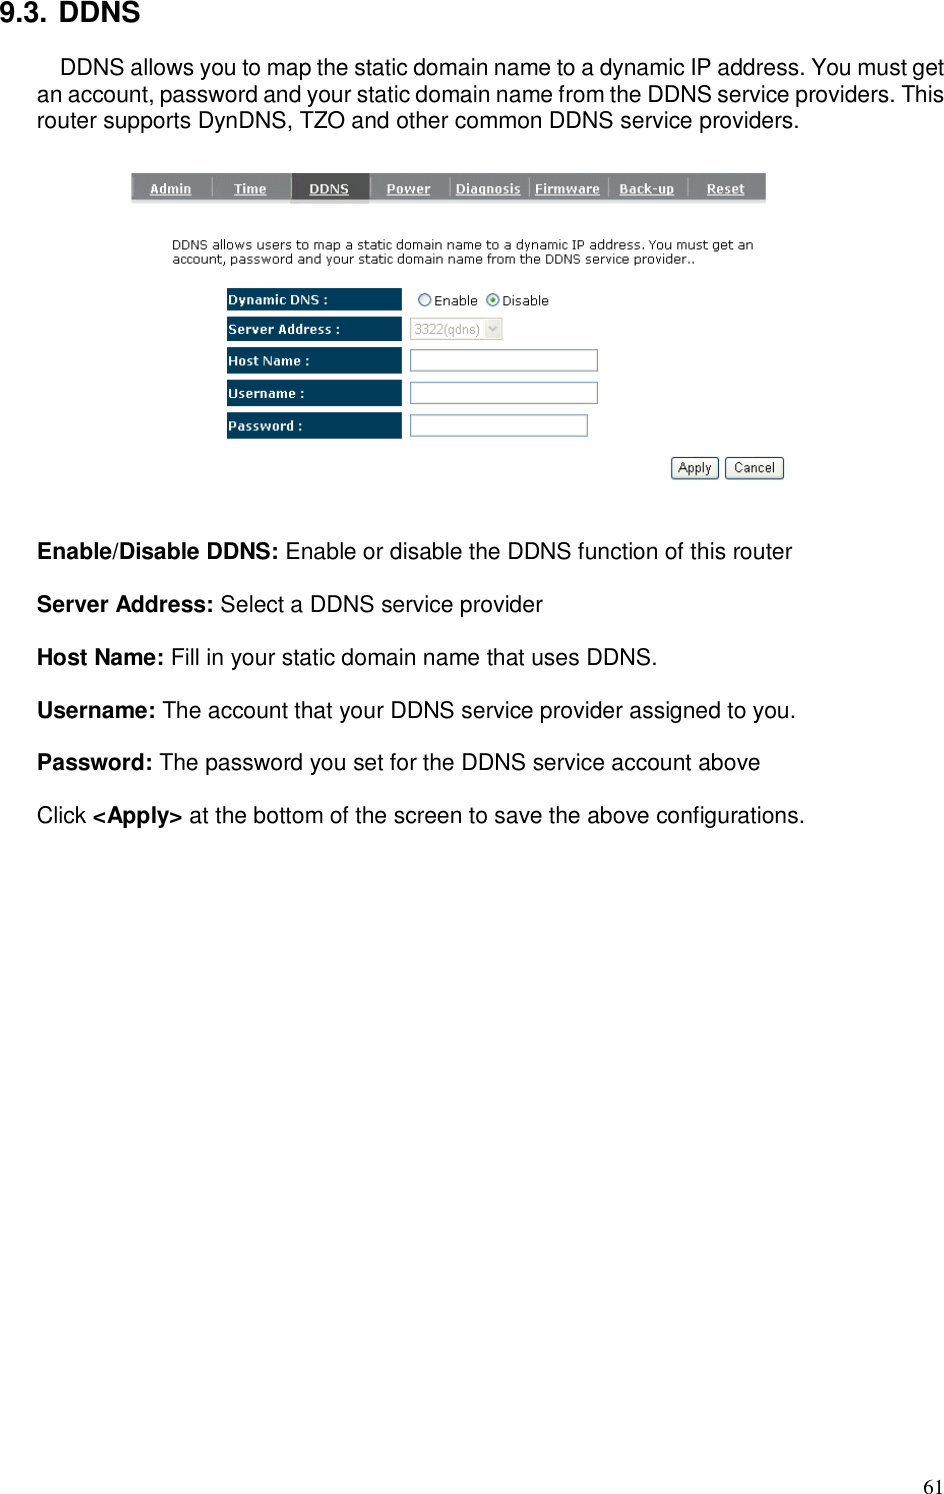  61 9.3. DDNS DDNS allows you to map the static domain name to a dynamic IP address. You must get an account, password and your static domain name from the DDNS service providers. This router supports DynDNS, TZO and other common DDNS service providers.    Enable/Disable DDNS: Enable or disable the DDNS function of this router  Server Address: Select a DDNS service provider  Host Name: Fill in your static domain name that uses DDNS.  Username: The account that your DDNS service provider assigned to you.  Password: The password you set for the DDNS service account above  Click &lt;Apply&gt; at the bottom of the screen to save the above configurations.  